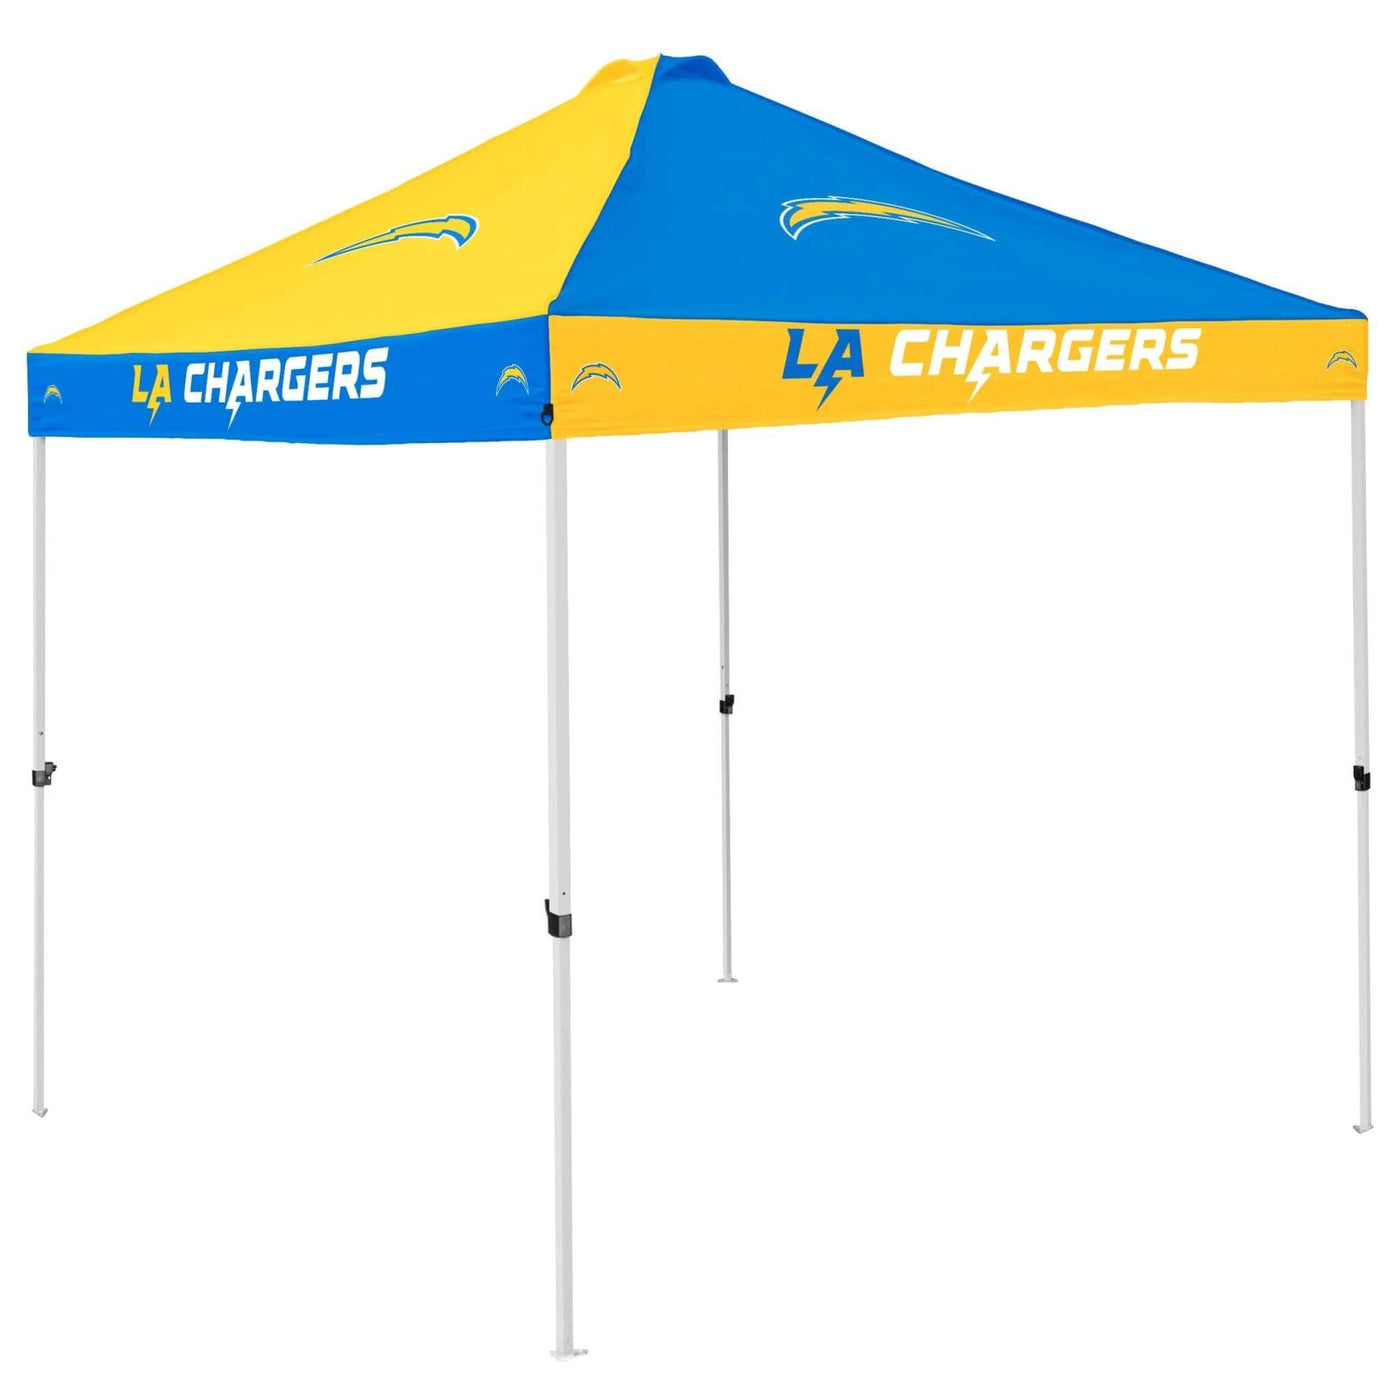 LA Chargers Checkerboard Canopy - Logo Brands